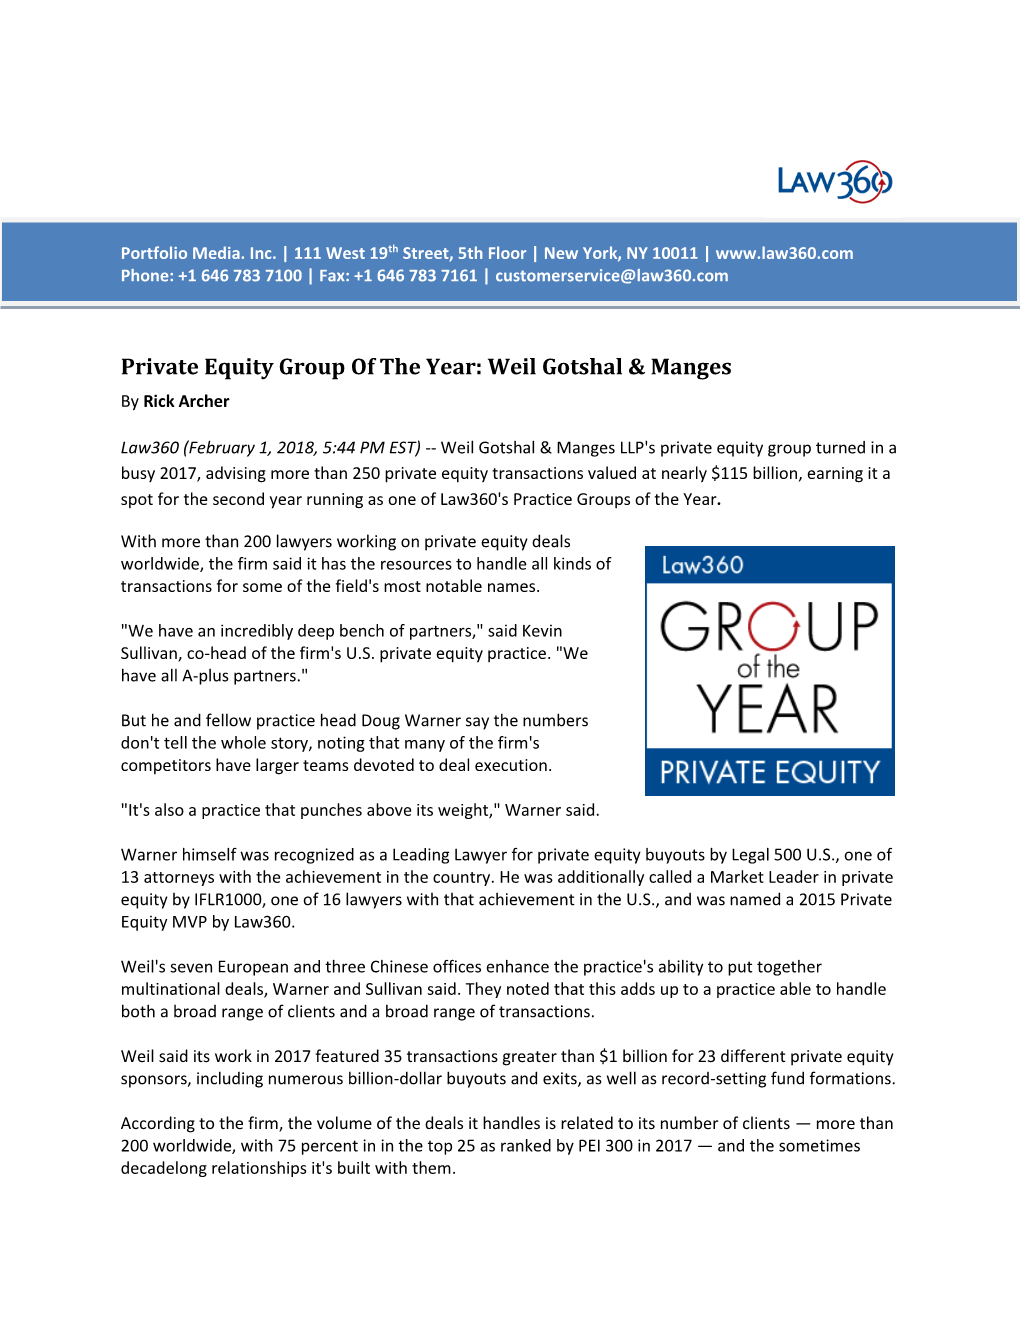 Private Equity Group of the Year: Weil Gotshal & Manges by Rick Archer